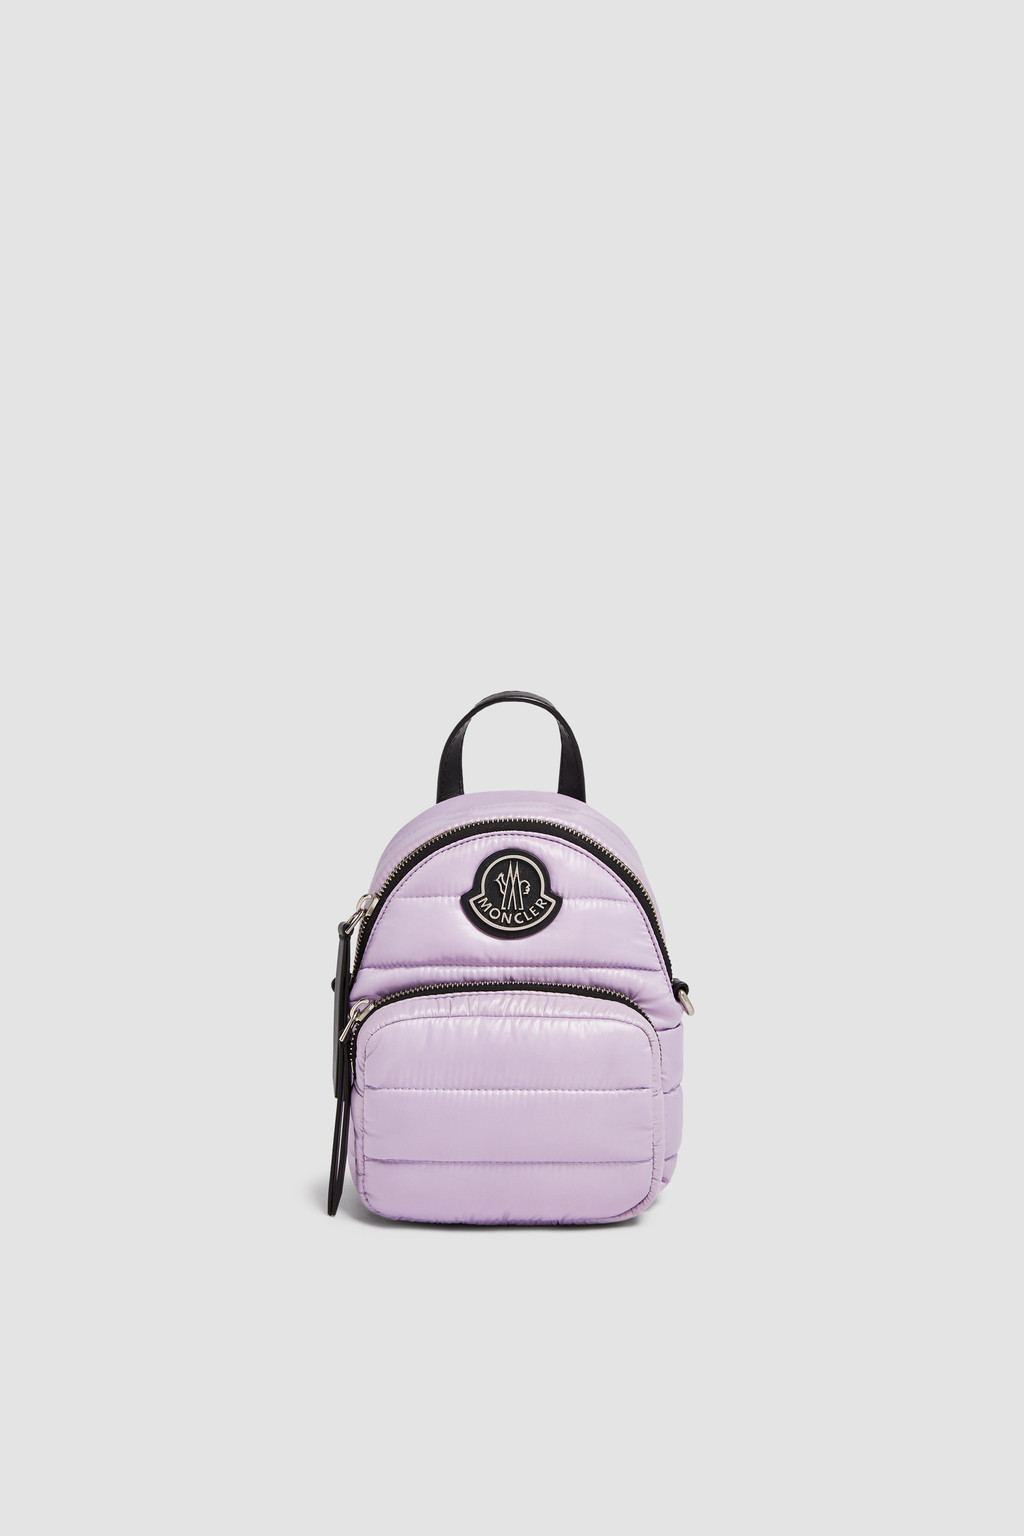 Mini caradoc quilted leather bag - Moncler - Women | Luisaviaroma